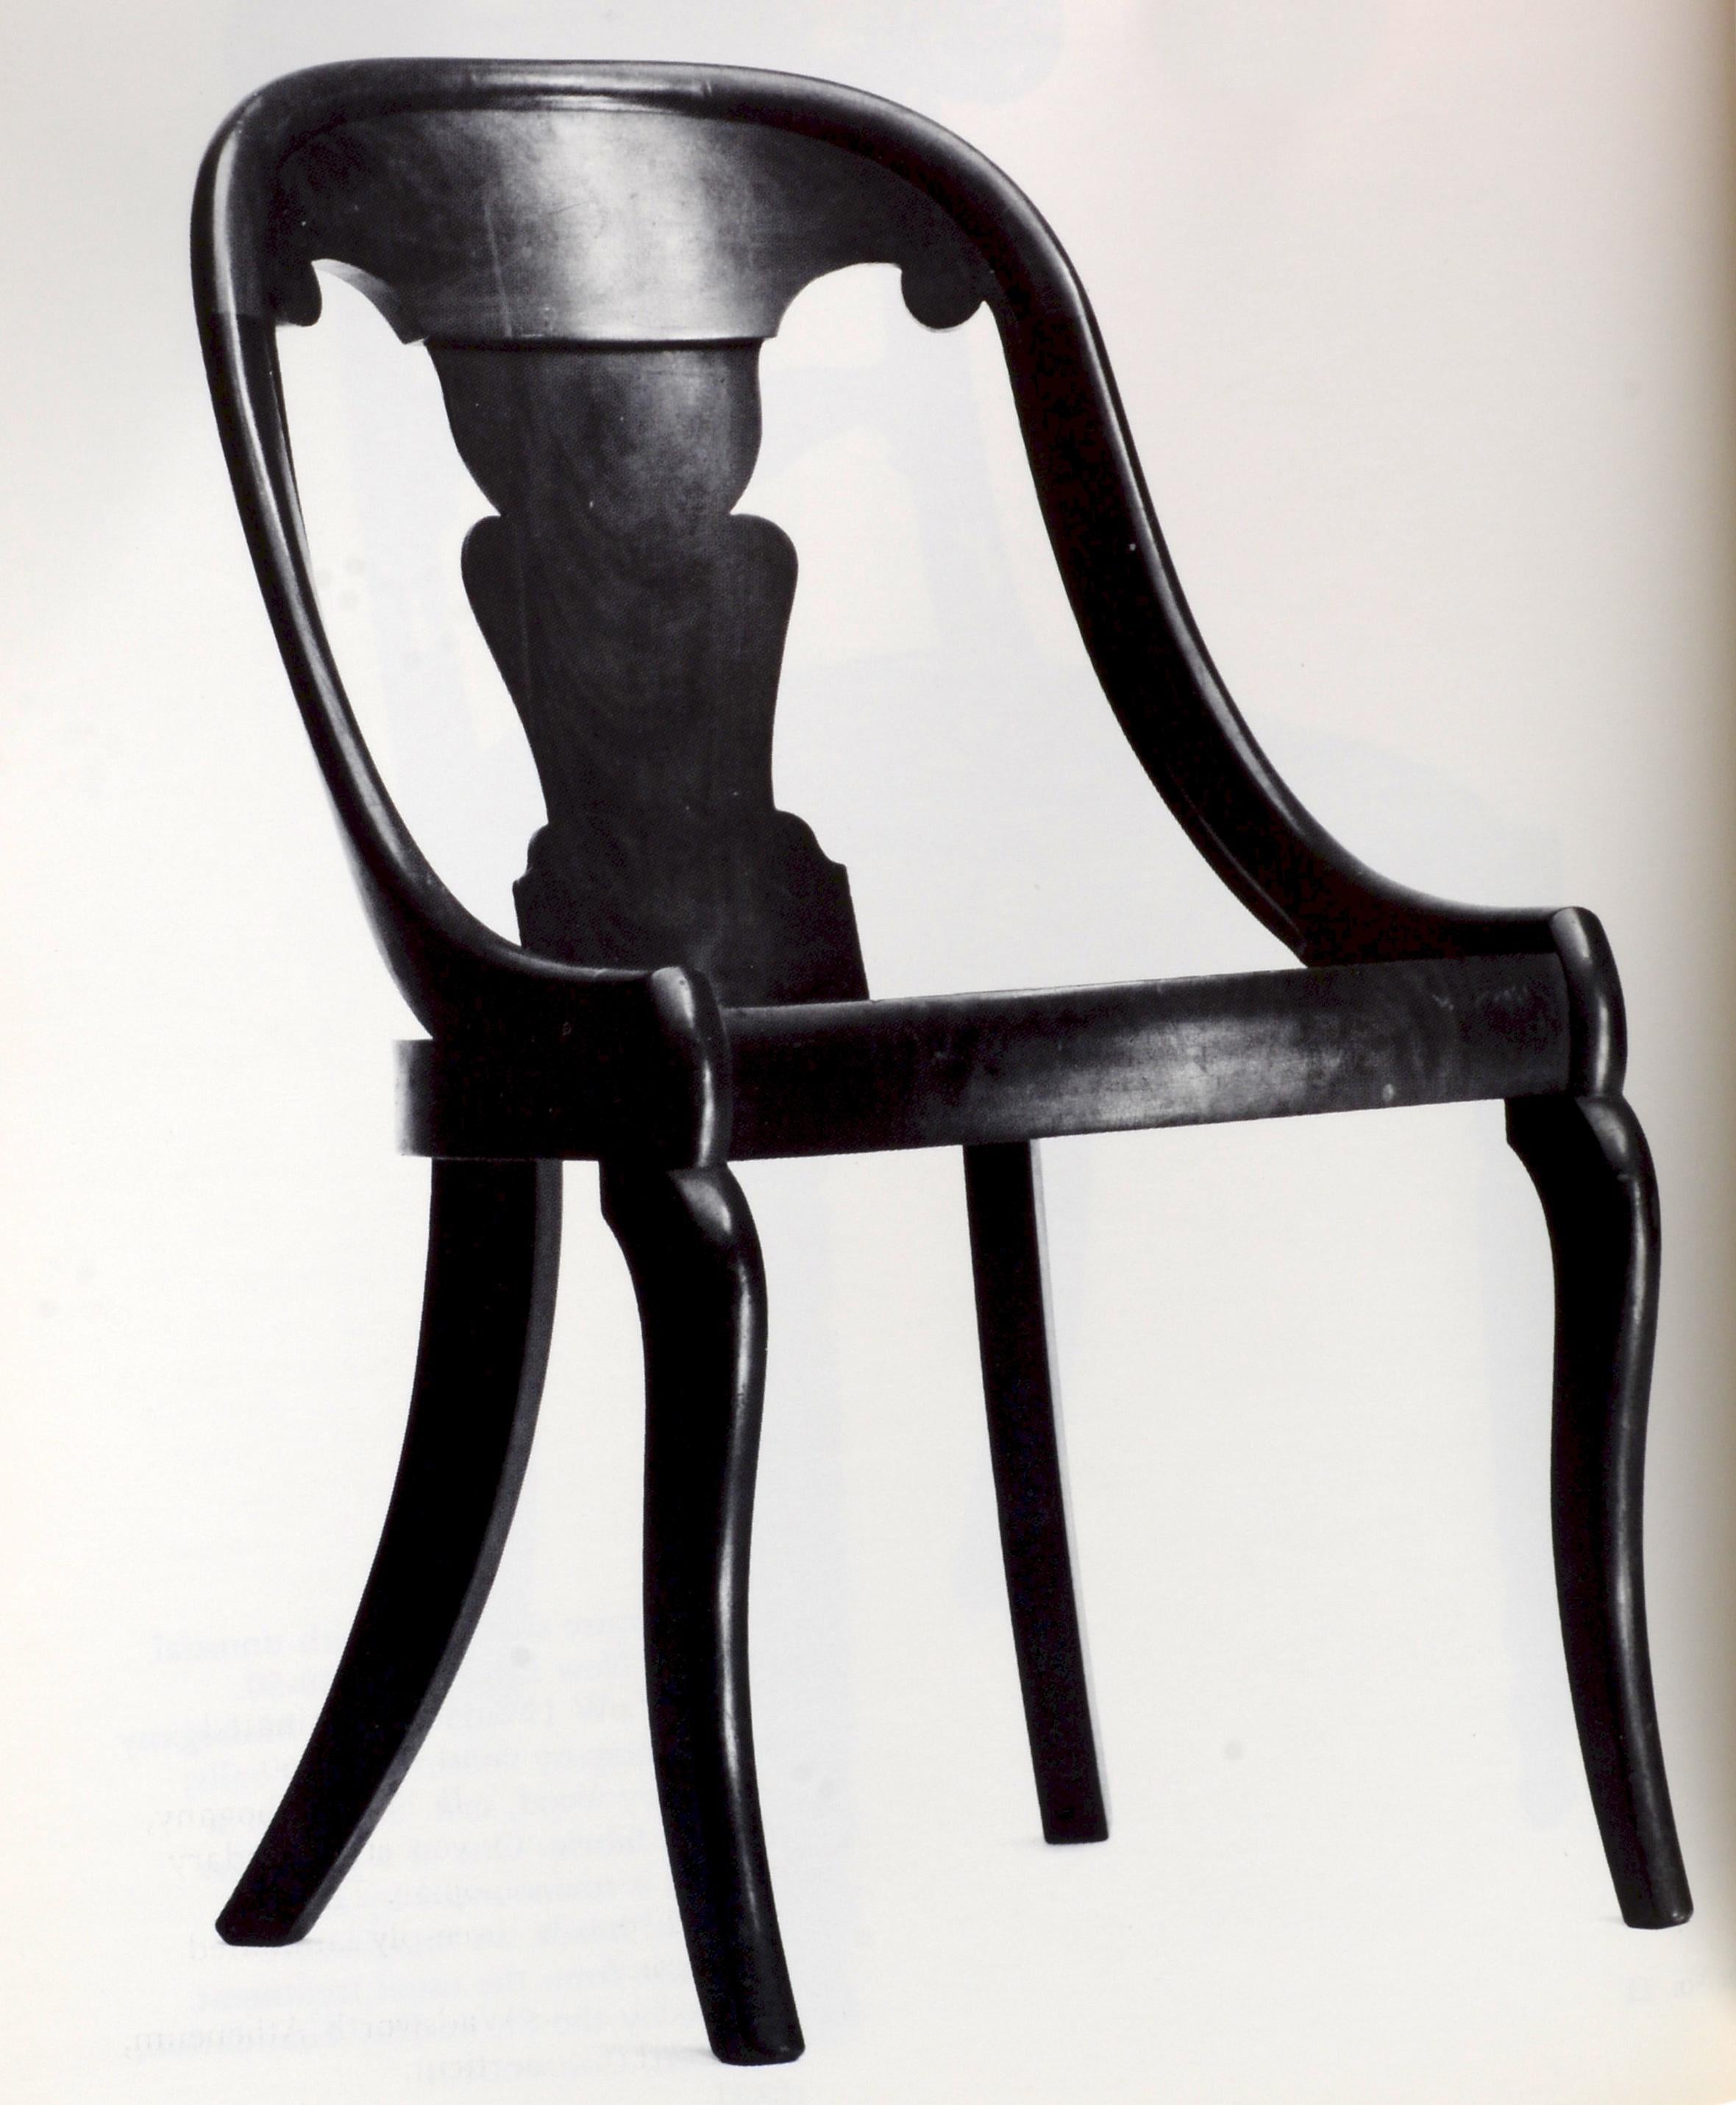 Selection of 19th c American Chairs, Exhib. Catalog Signed by the Author, 1st Ed For Sale 4